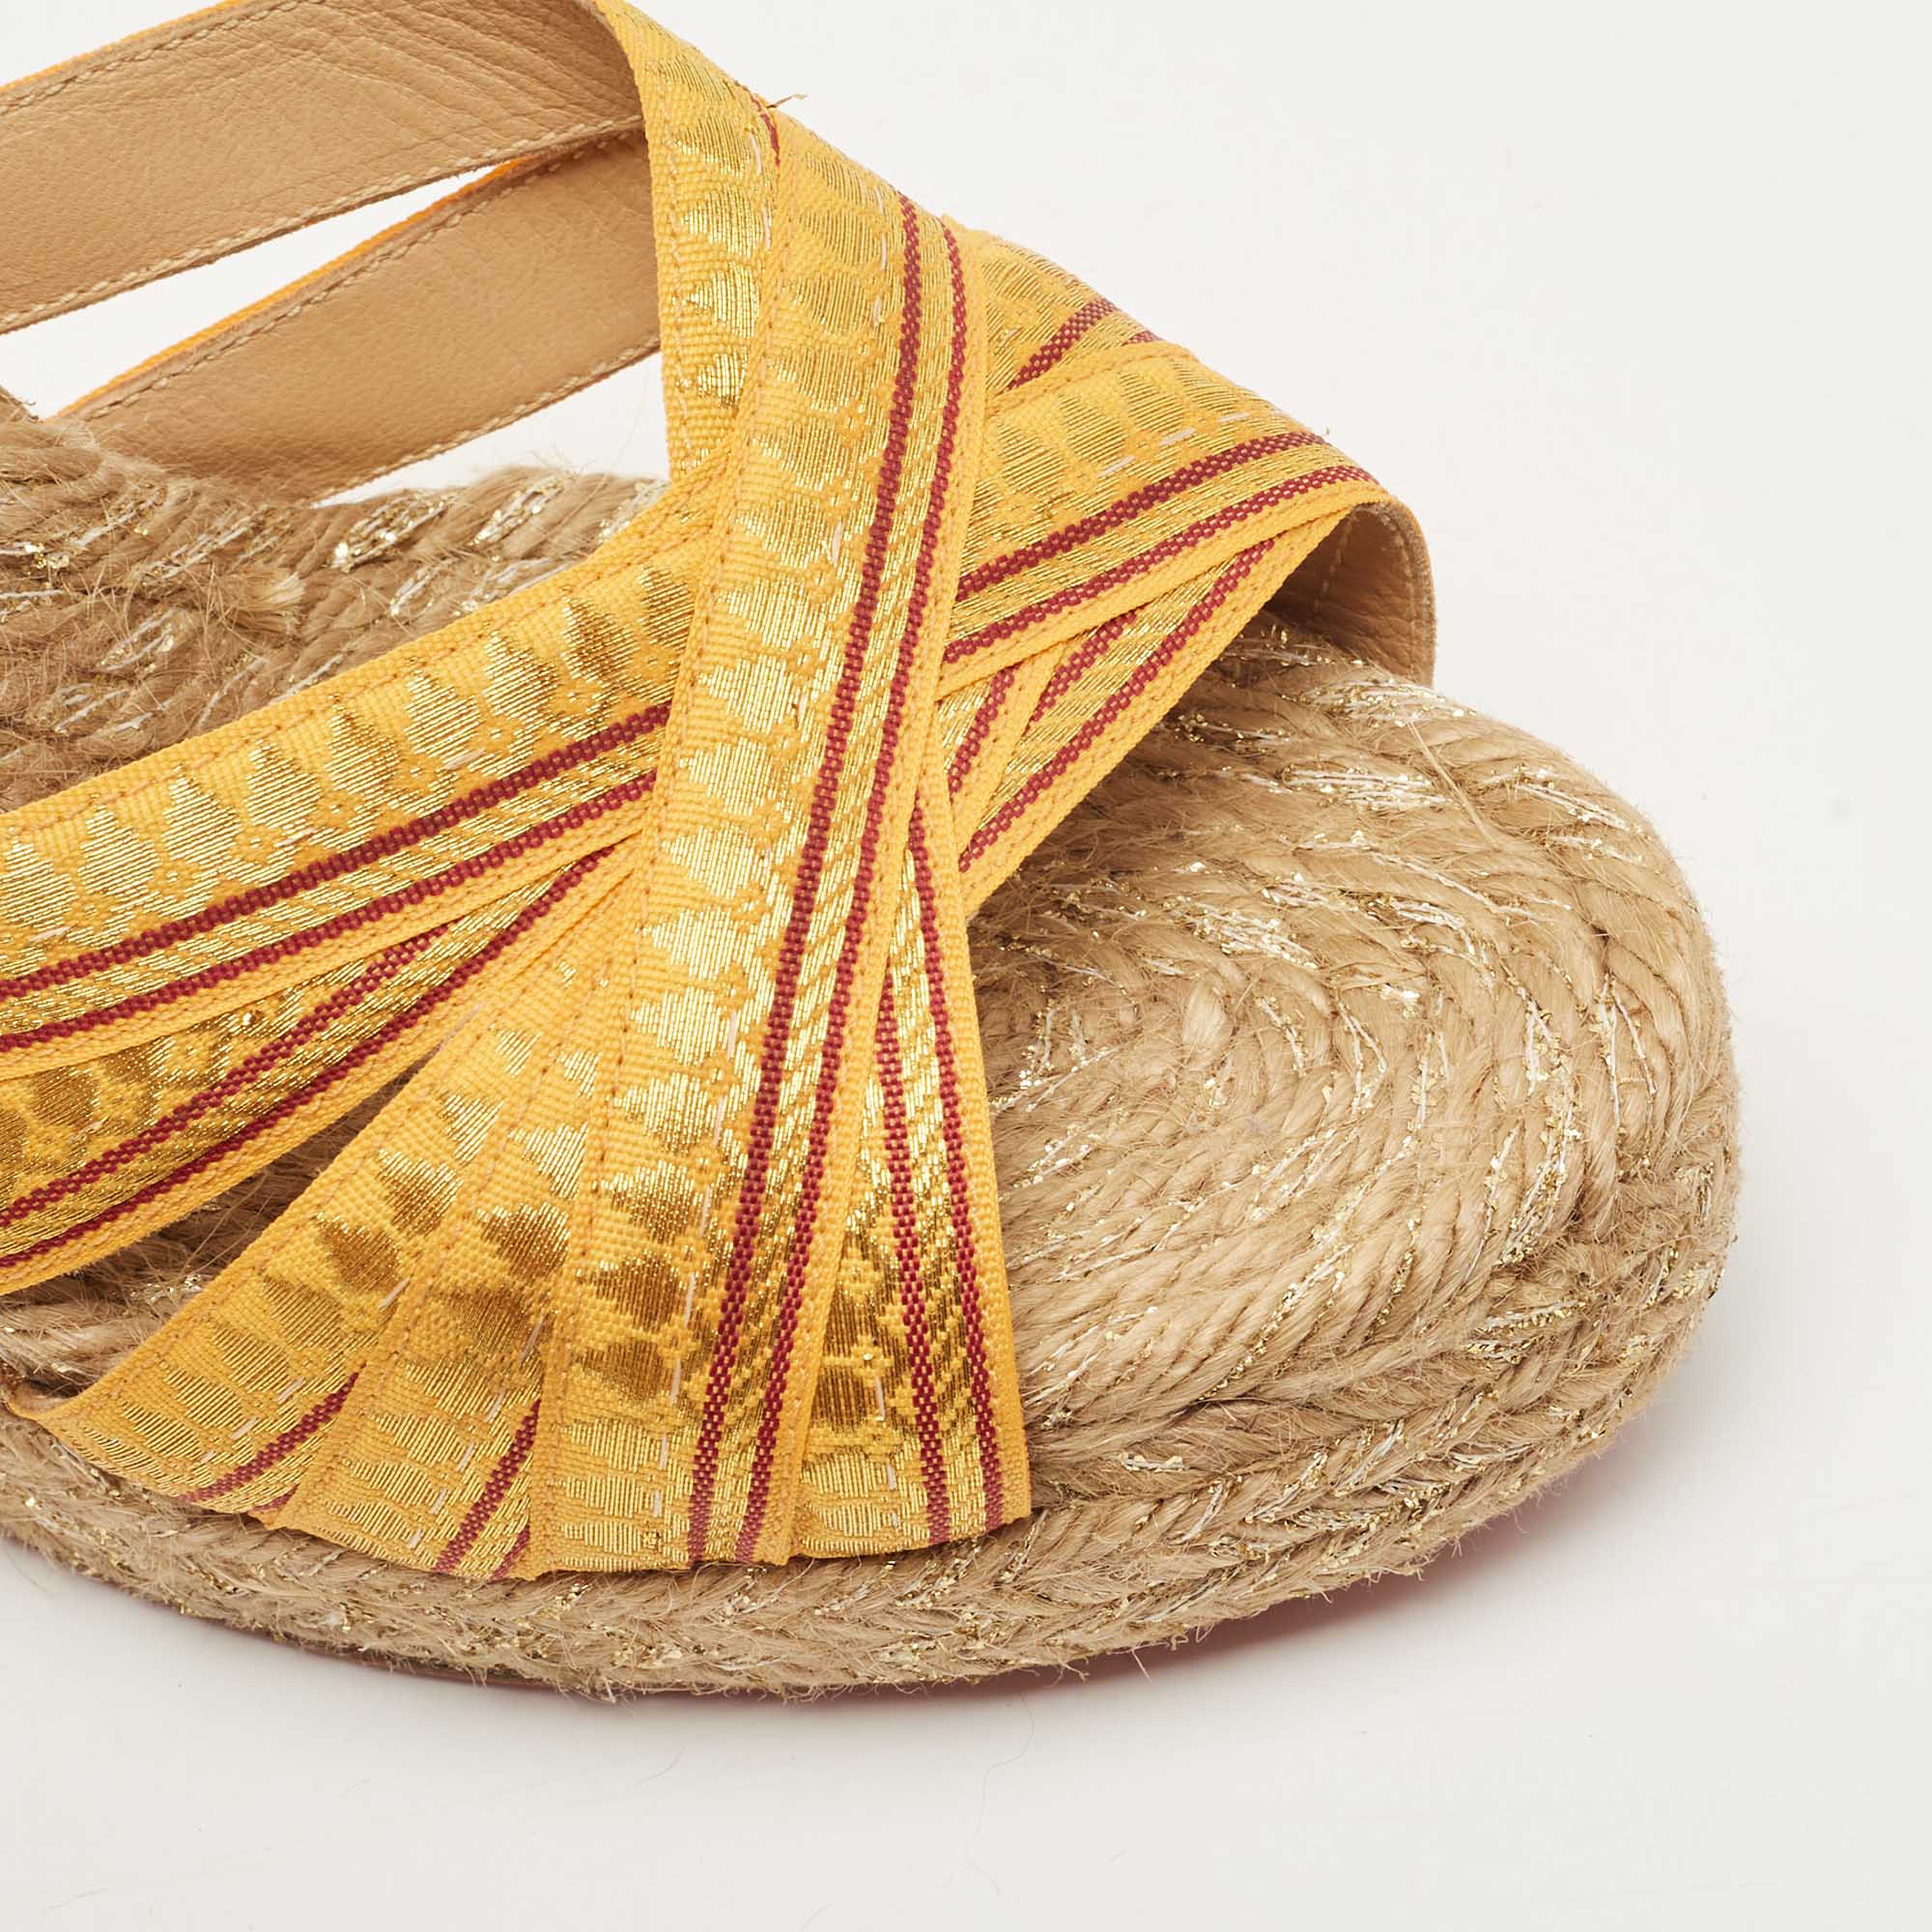 Christian Louboutin Yellow/Gold Lace Espadrille Wedge Slide Sandals Size 37